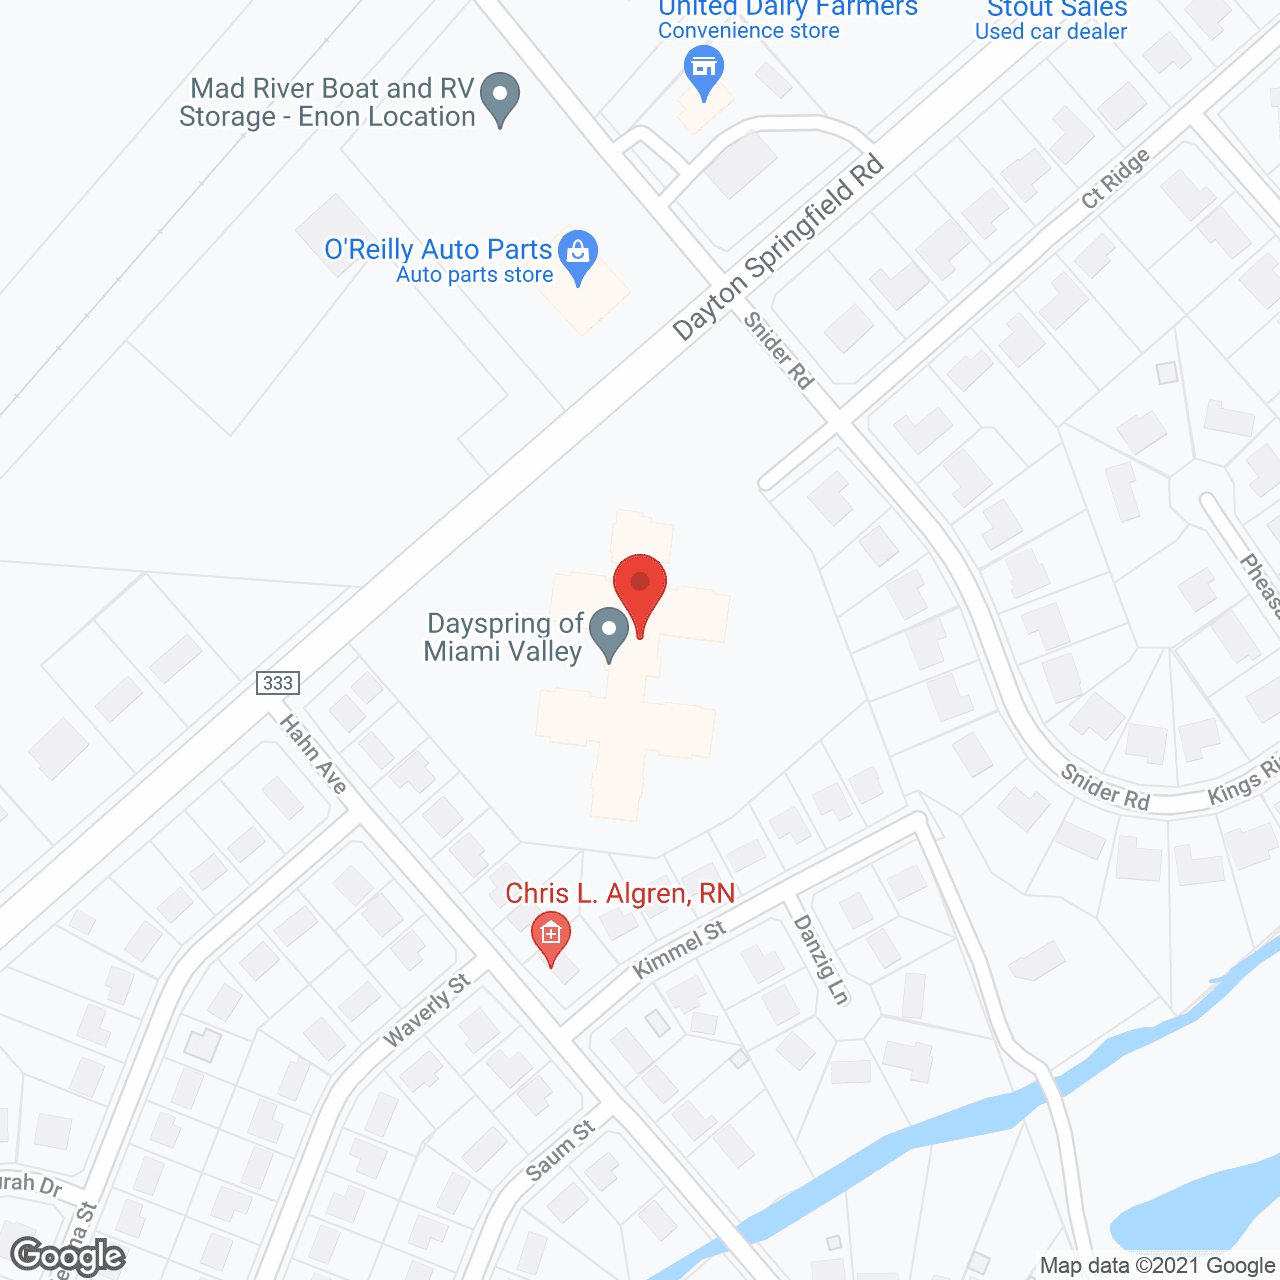 Dayspring Transitional Care Center in google map